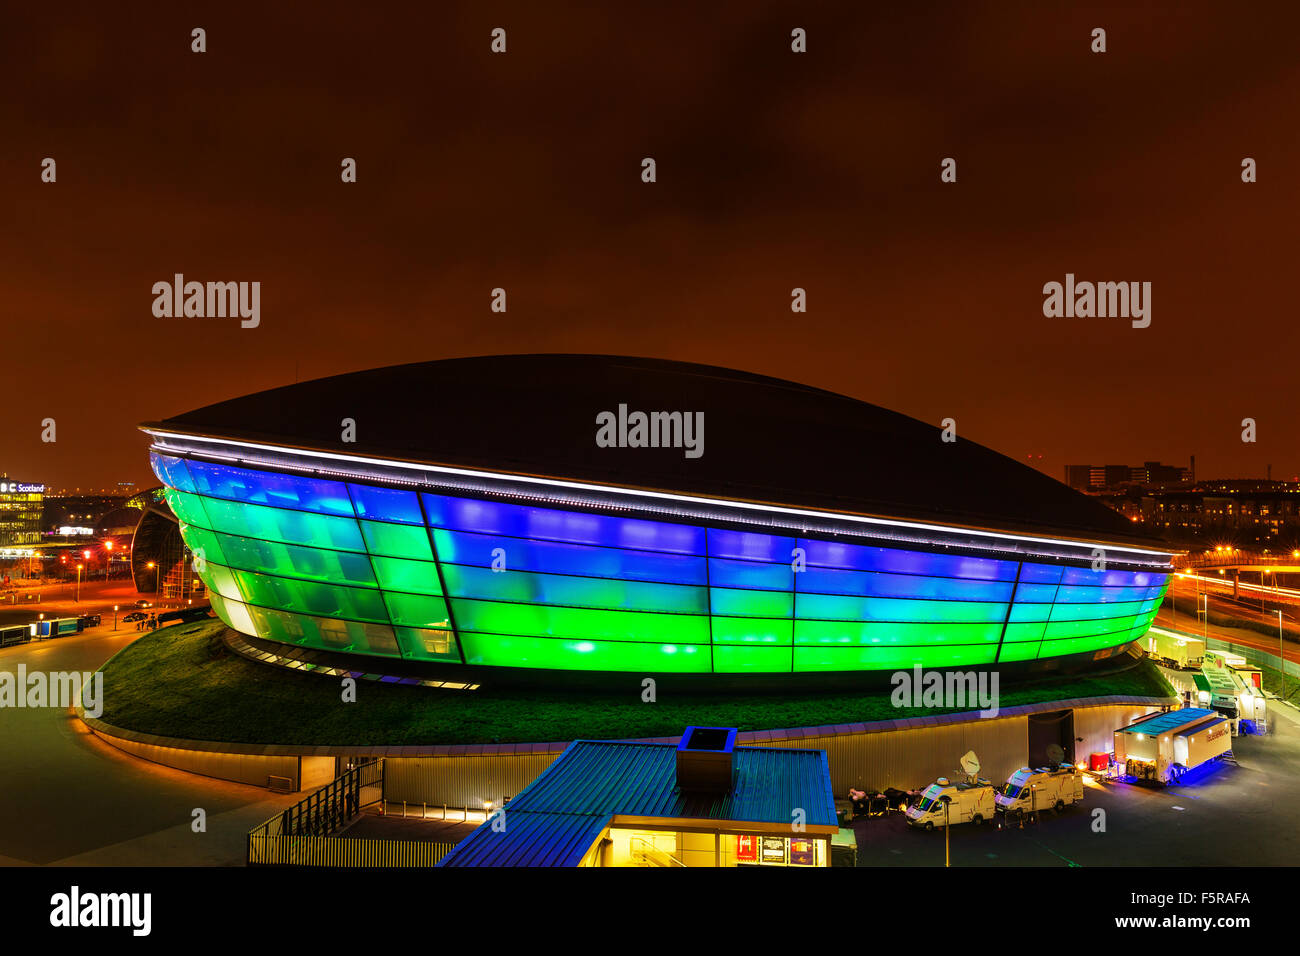 GLASGOW, SCOTLAND. OCTOBER 27 2015 : The SSC Hydro Stadium Illuminated at Night on the banks of River Clyde, Glasgow, Scotland Stock Photo